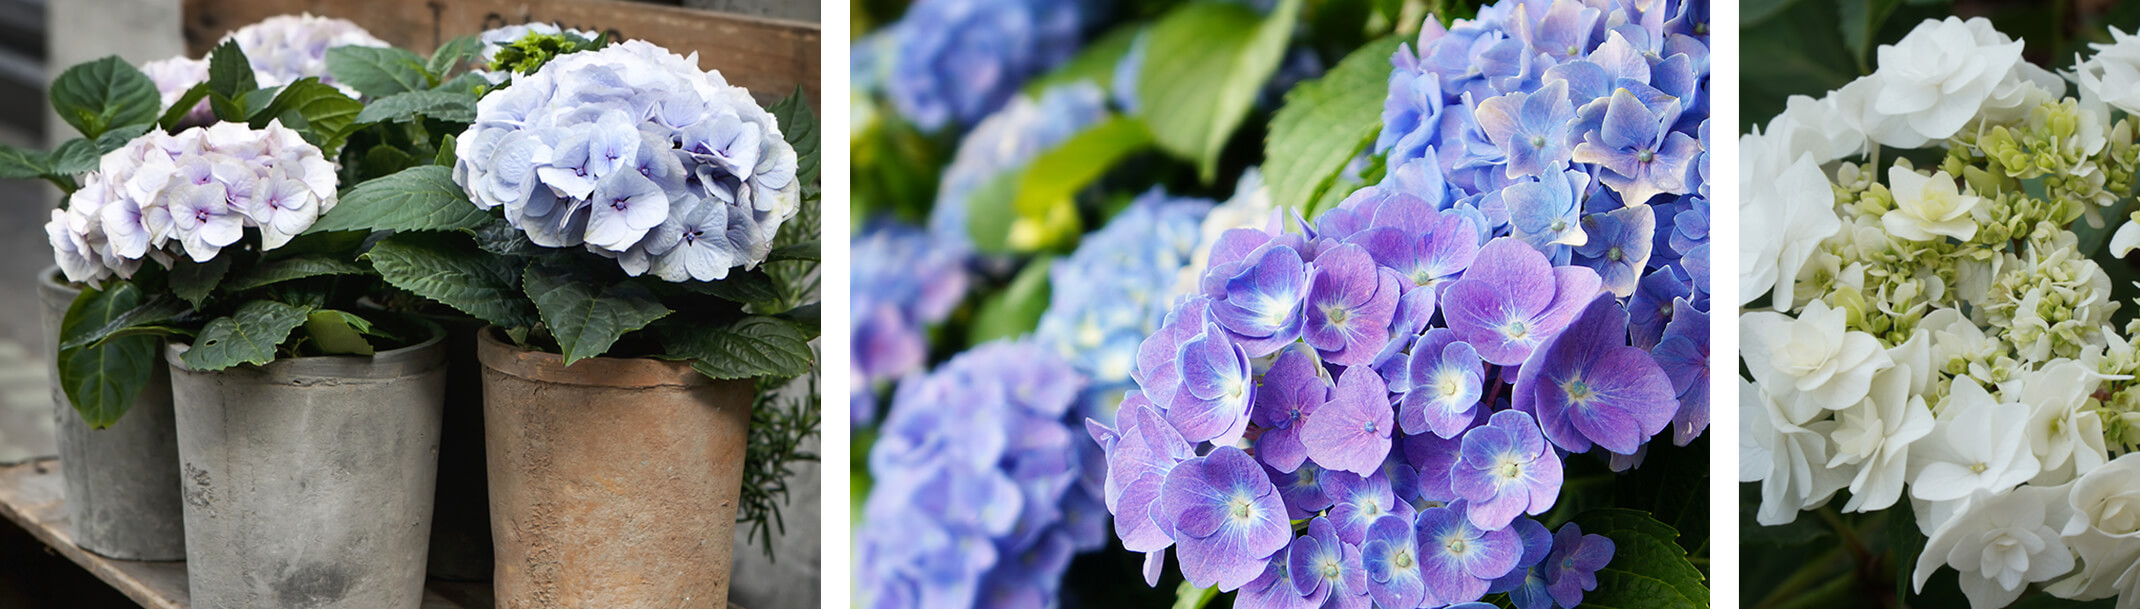 3 images - the first is light purple hydrangeas in cement containers on wooden bench, second image is close up of purple-blue hydrangea shrub, third image white wedding hydrangea